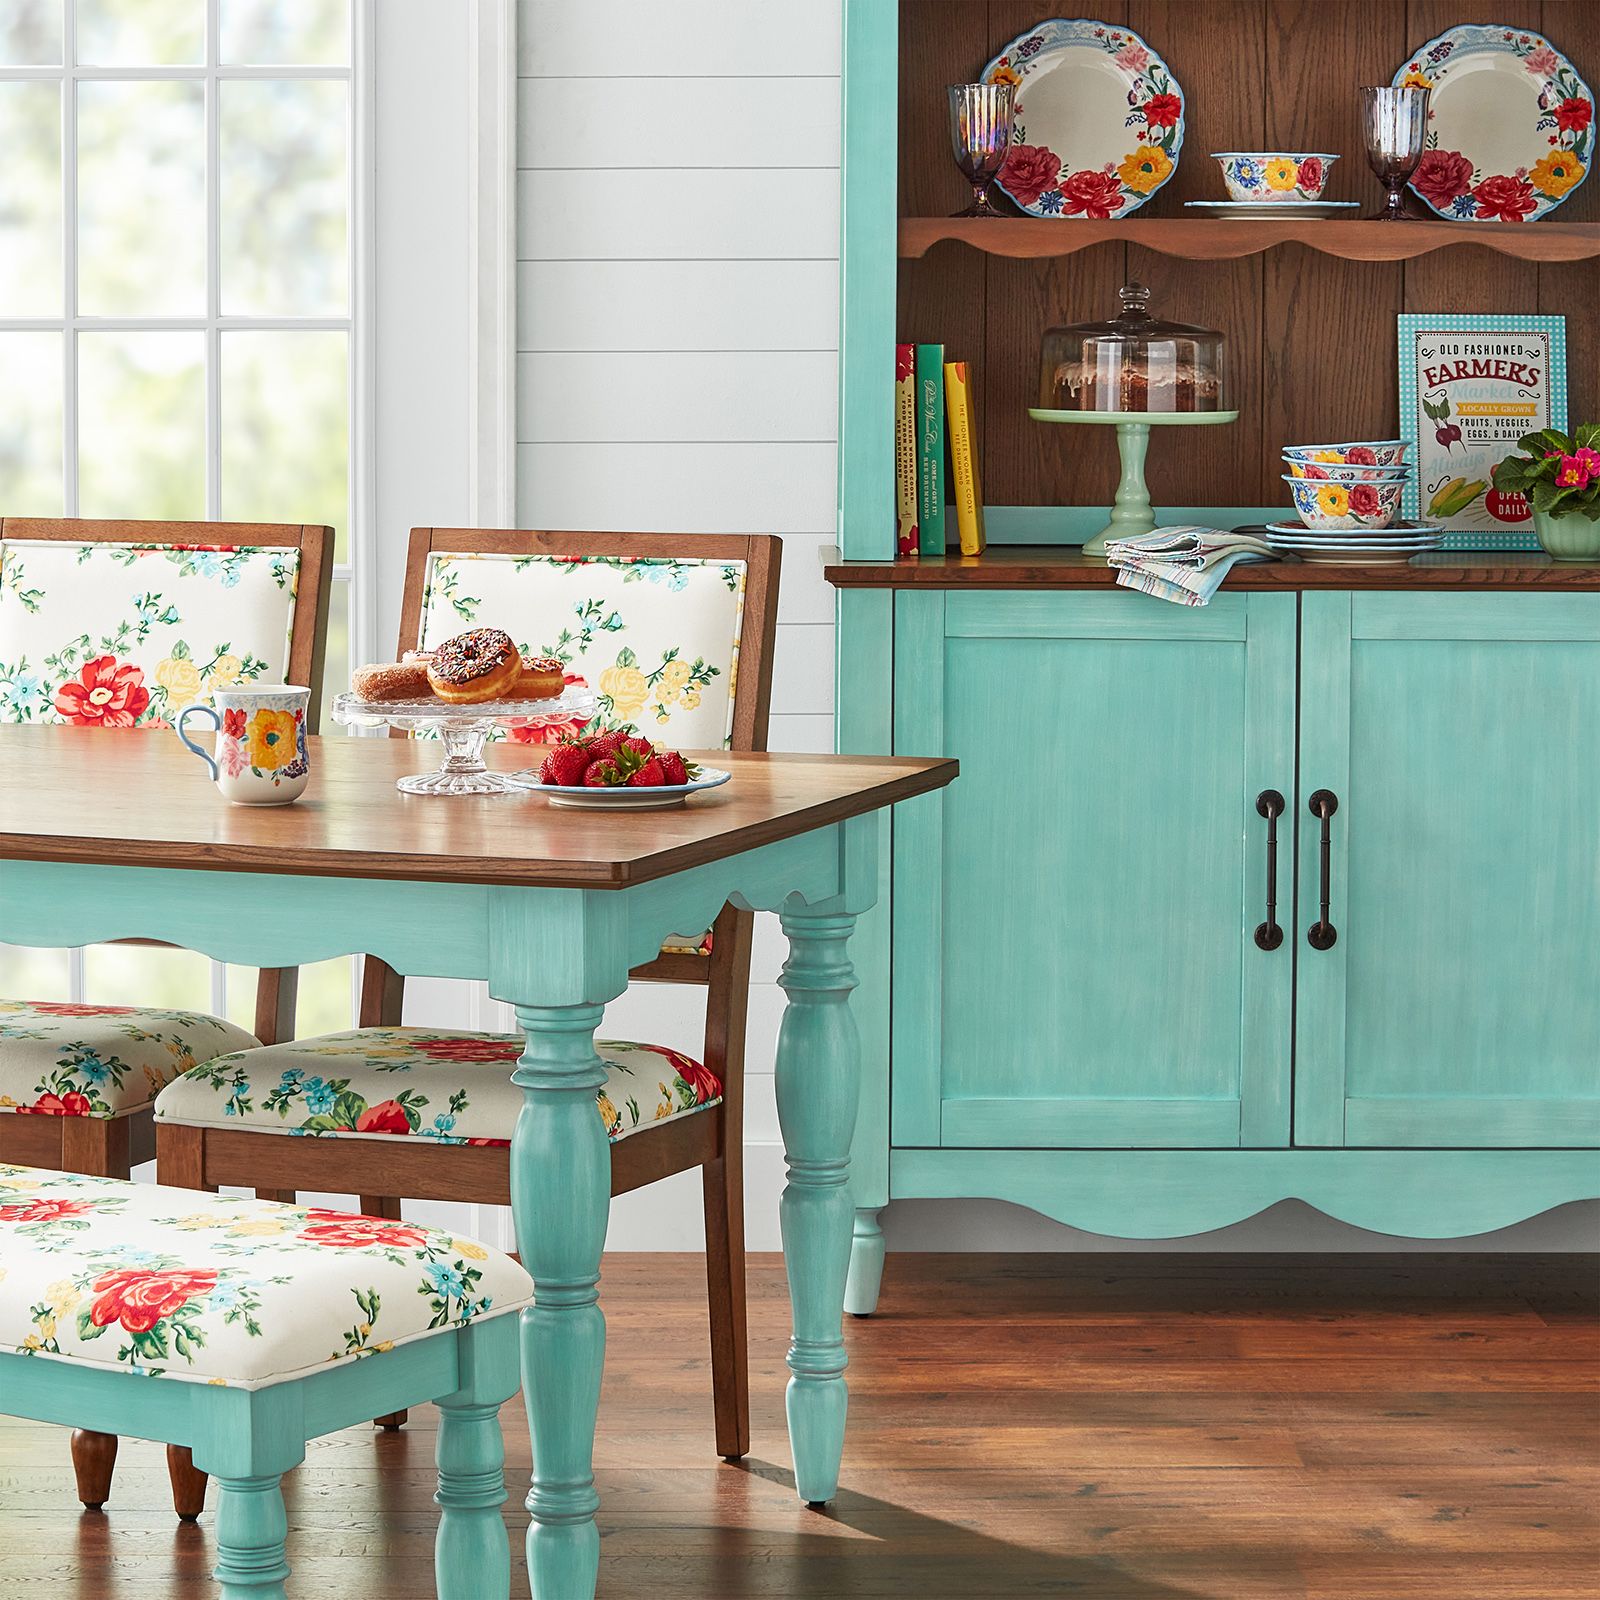 The Pioneer Woman Furniture Collection Is Officially Here